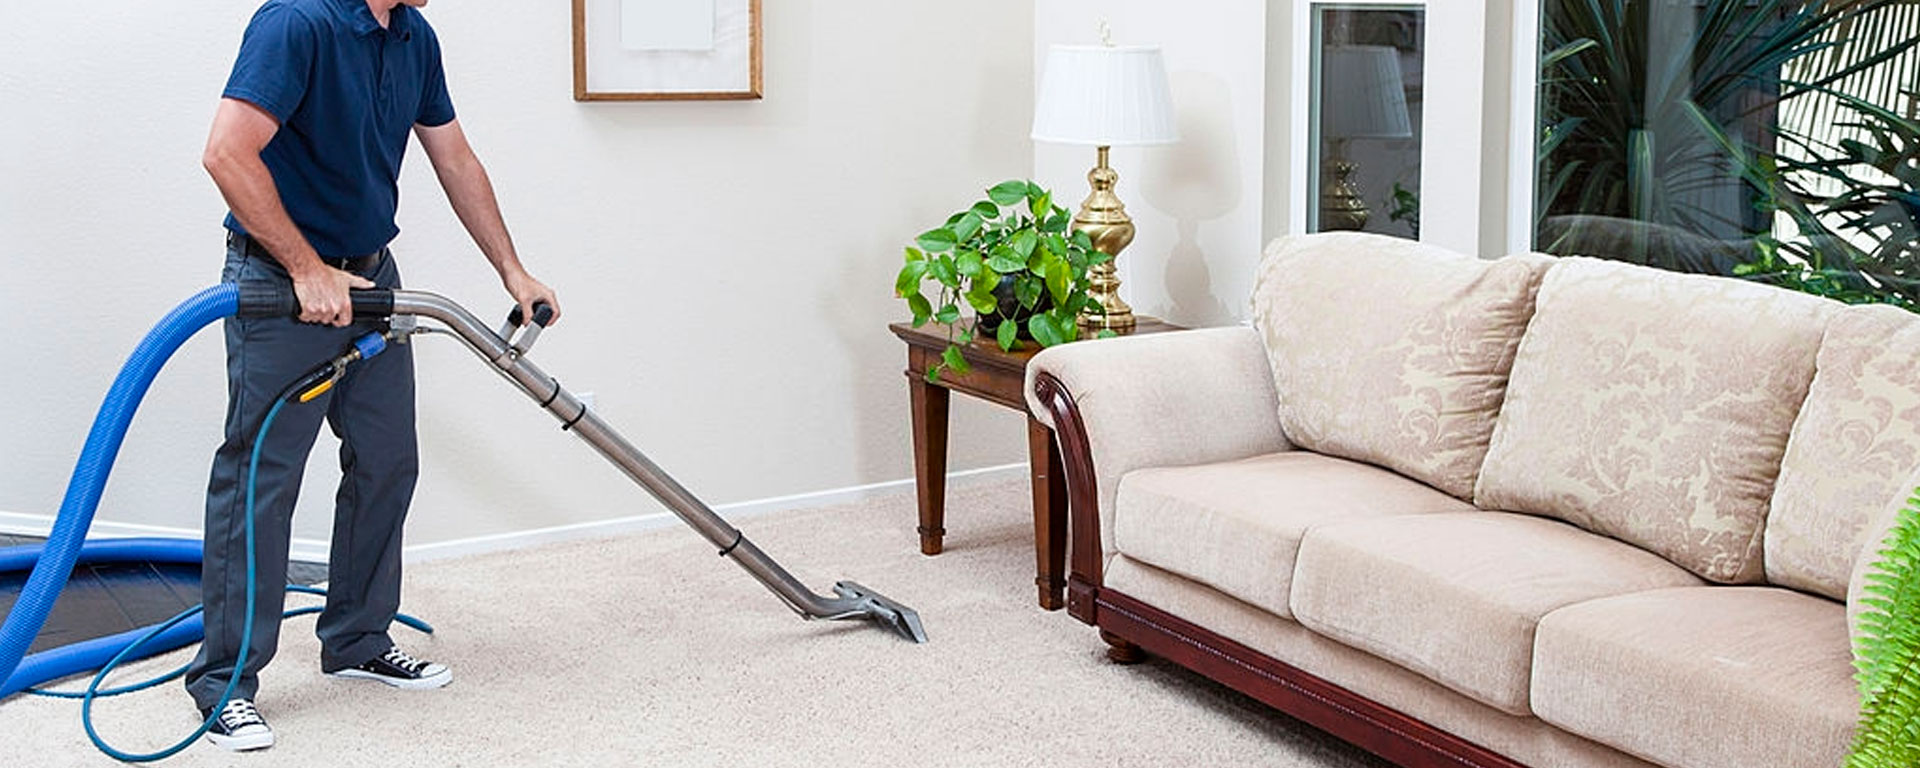 dura-dry-restoration-services-carpet-cleaning